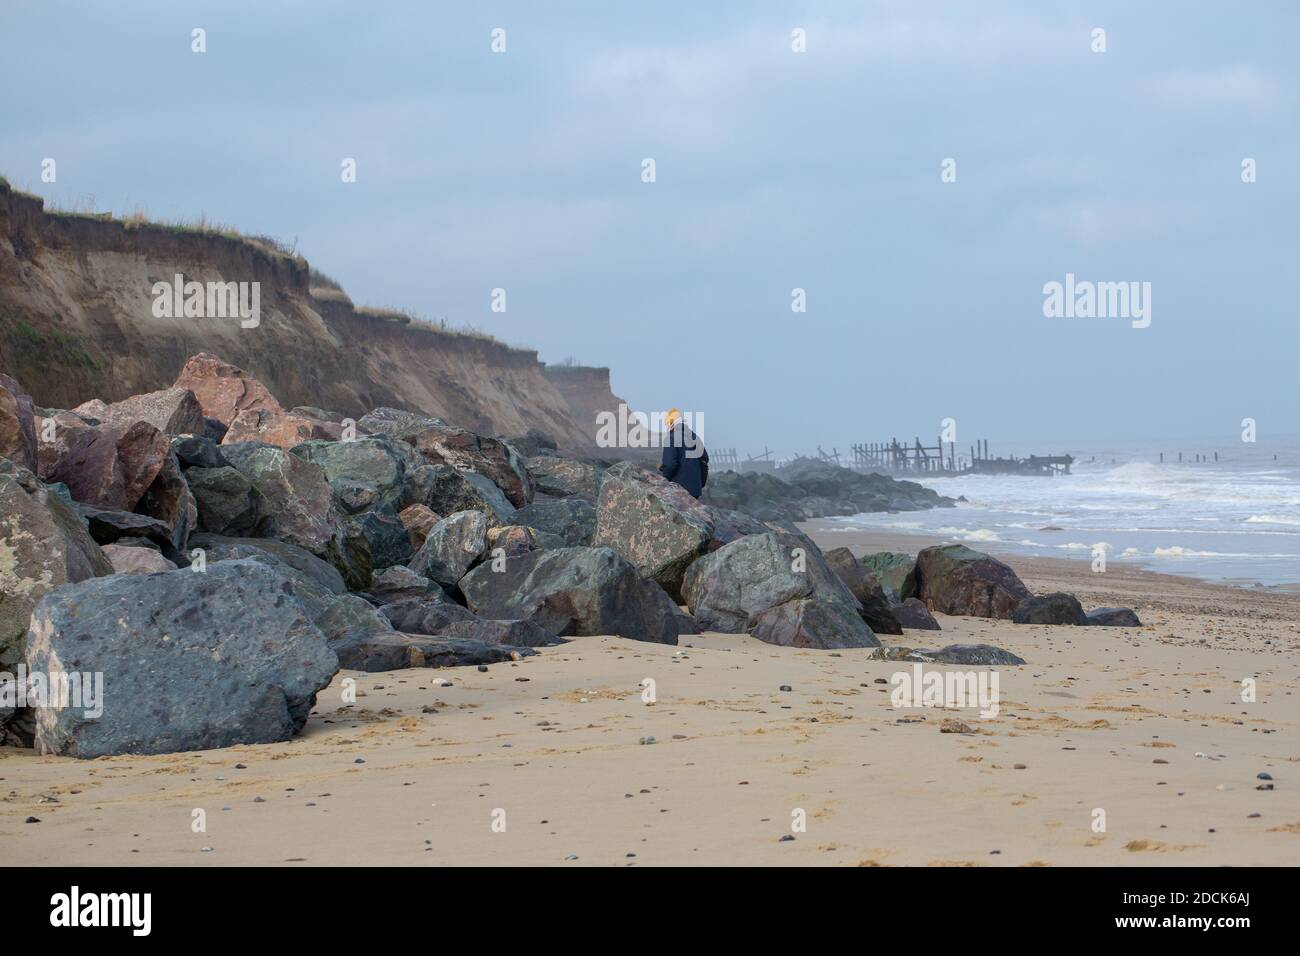 Happisburgh beach, Norfolk. Coastal cliff erosion by the North Sea. Sea defences of imported Norway rocks foreground, attempt at replacing old timber Stock Photo